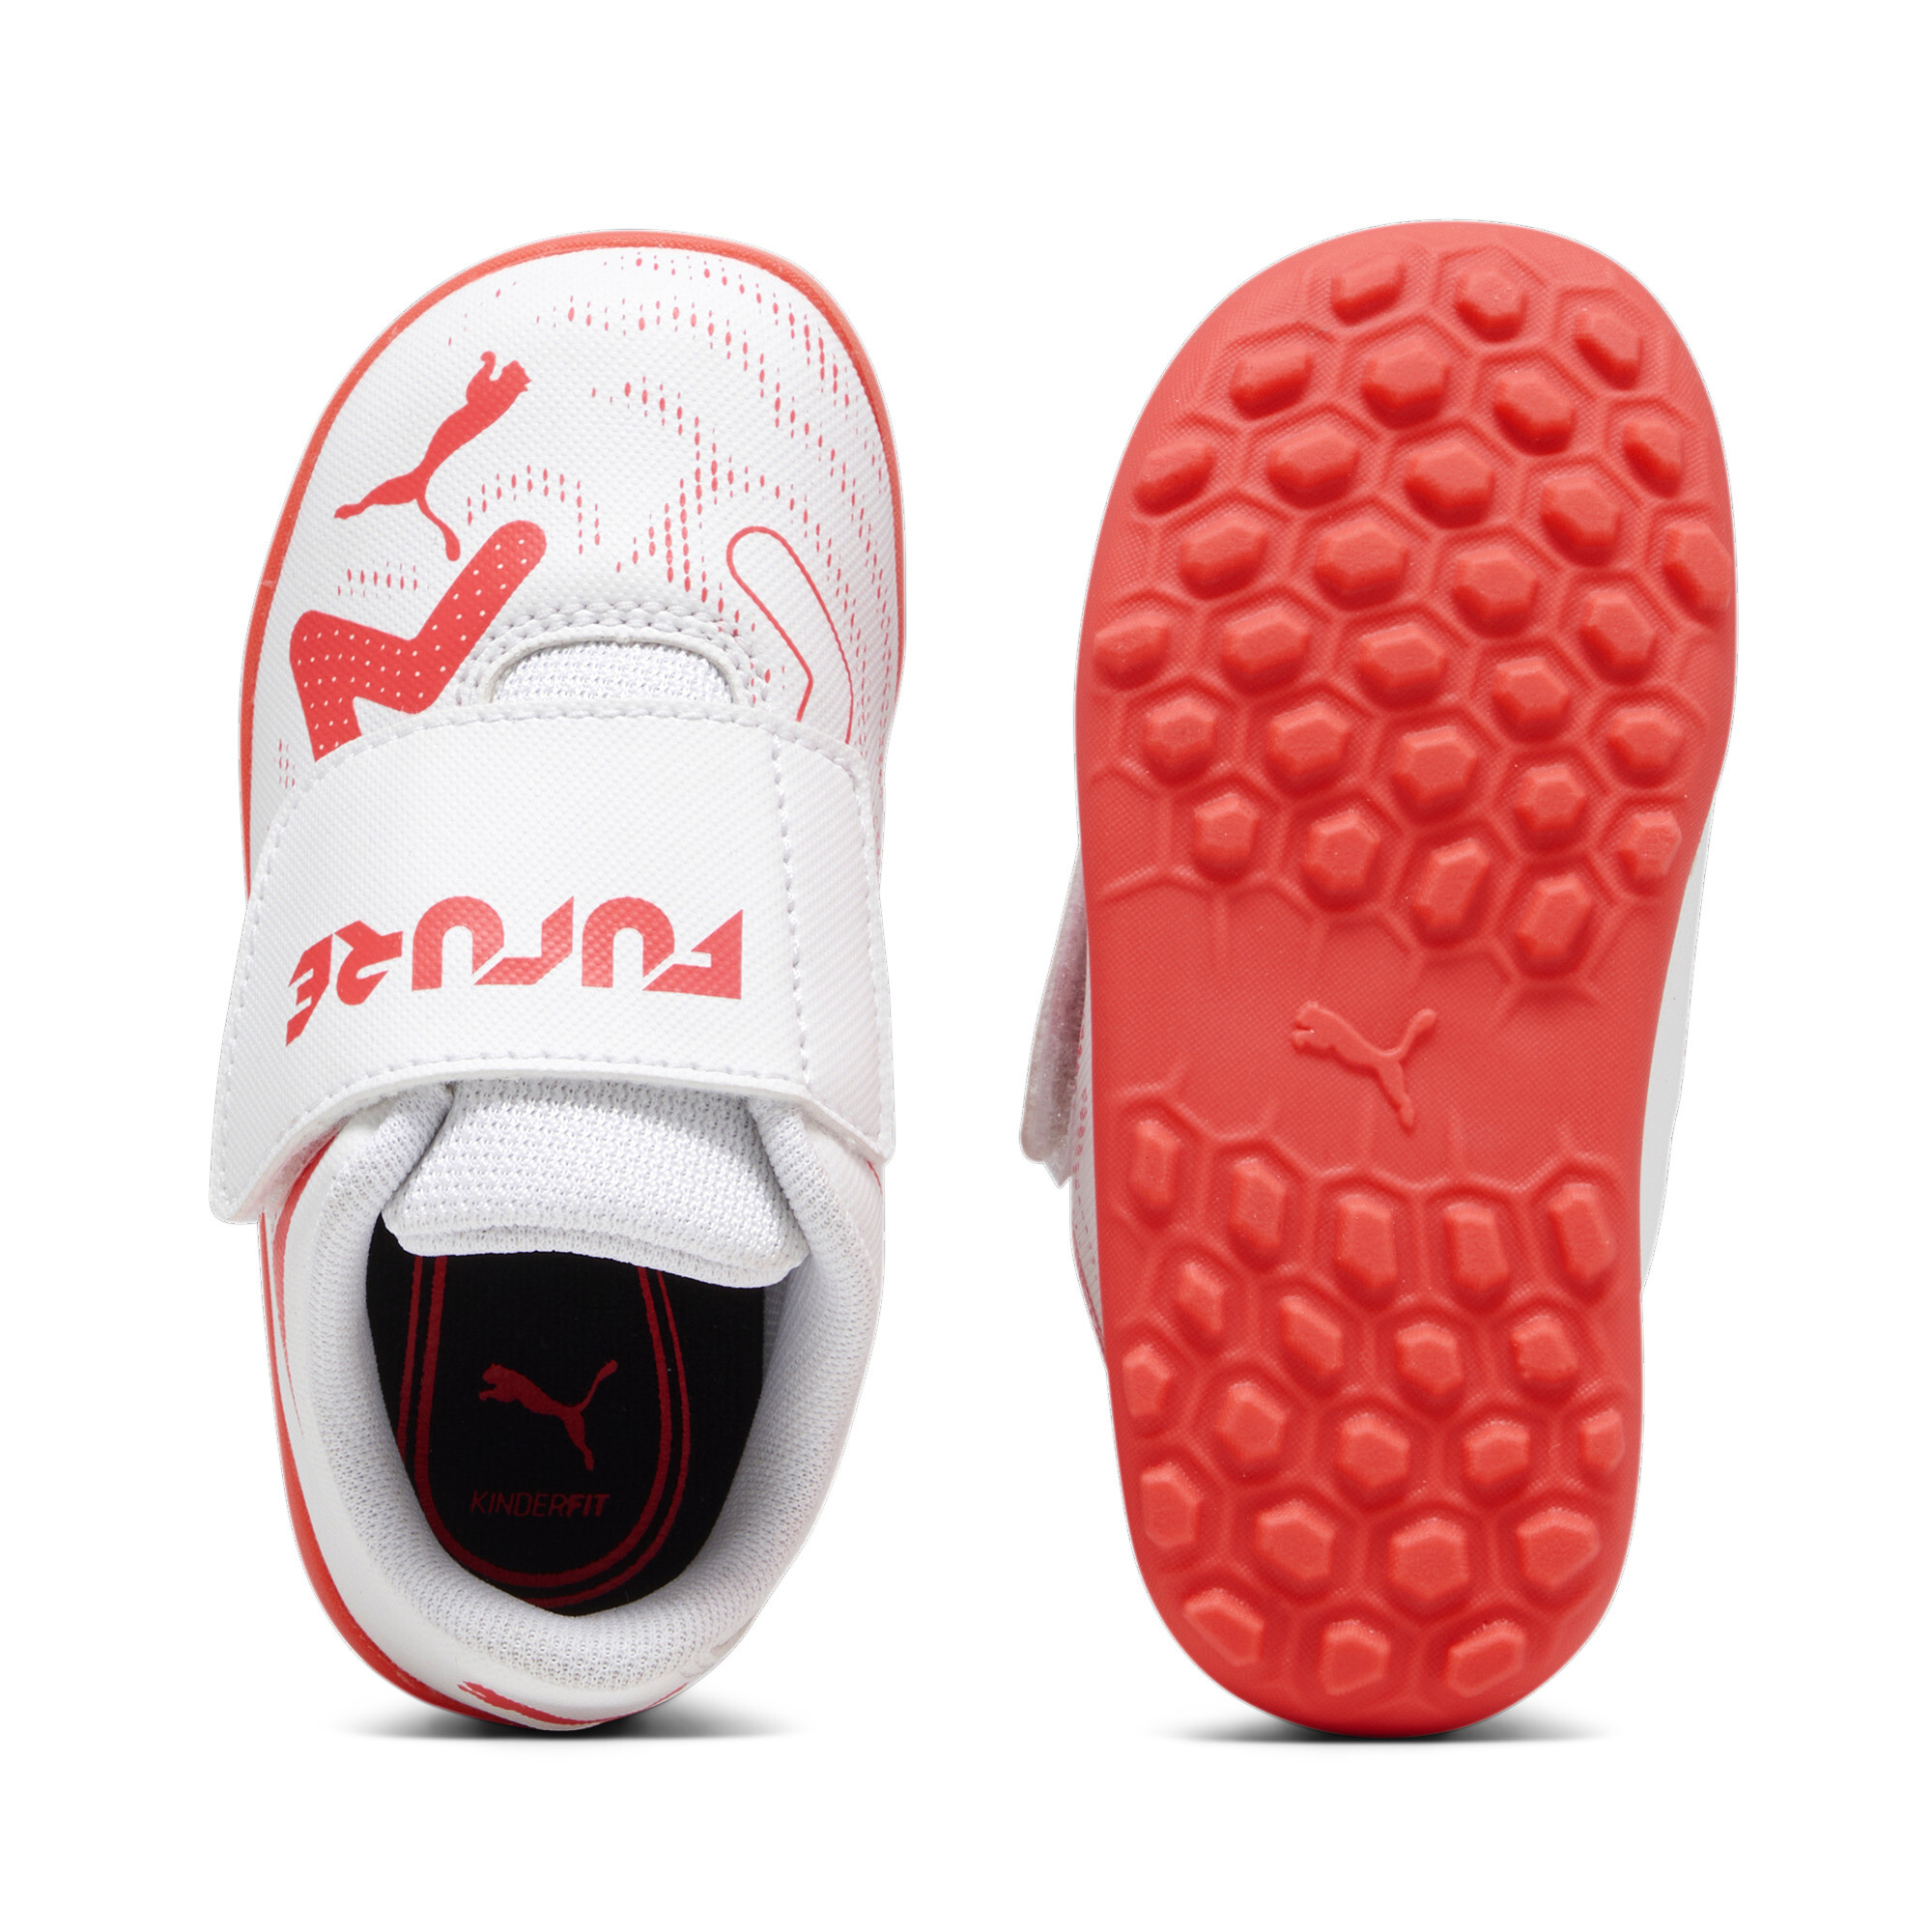 Kids' PUMA FUTURE PLAY TT Toddlers' Football Boots In White, Size EU 24